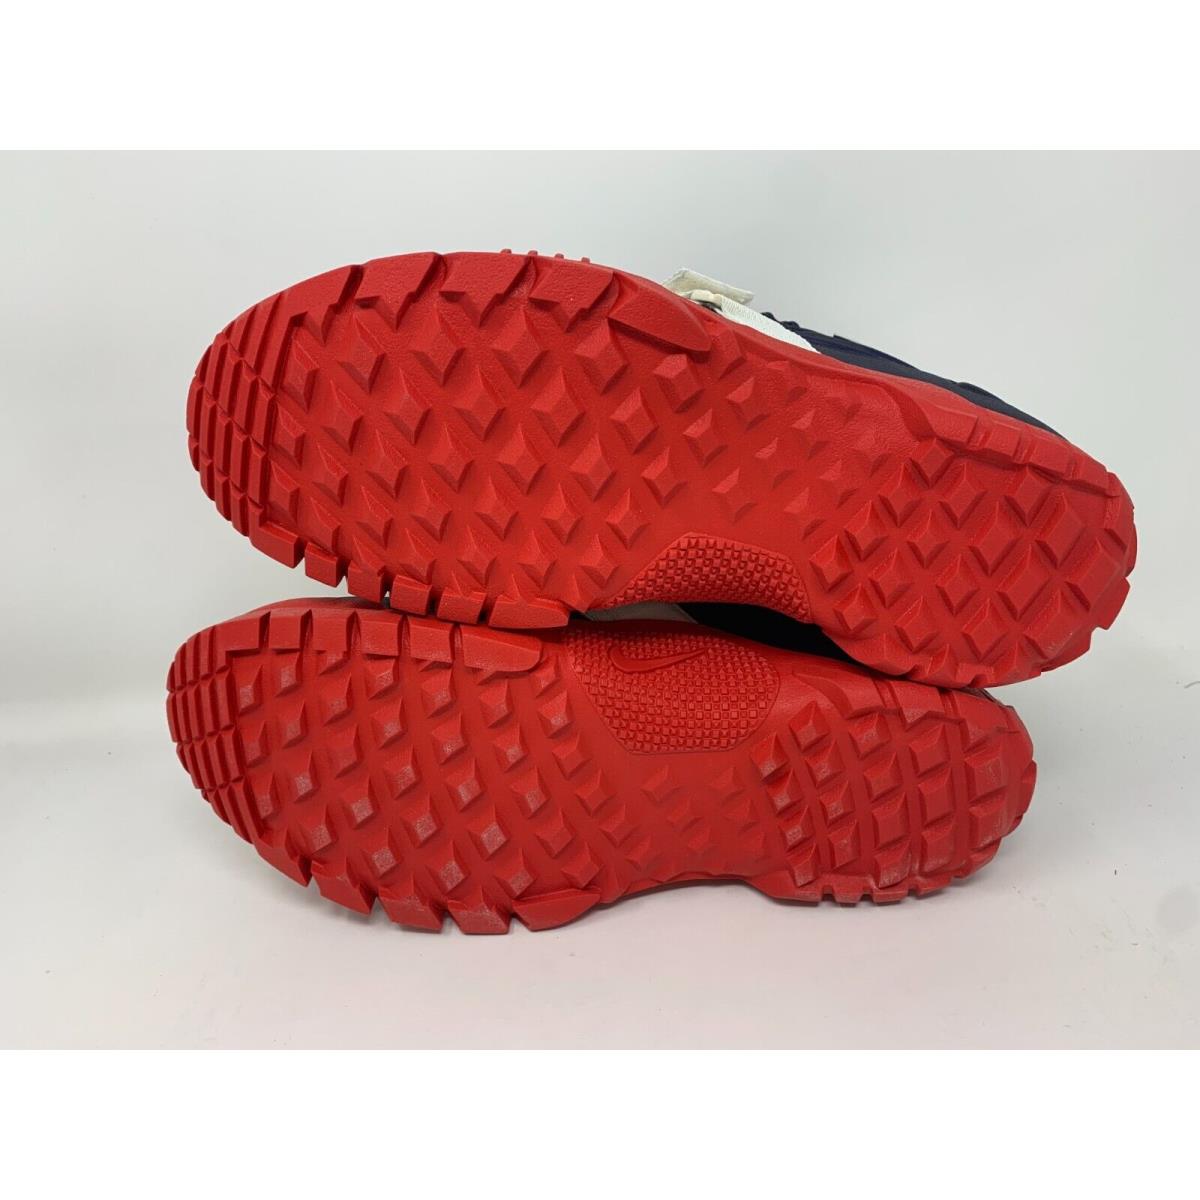 Nike shoes SFB - Red 1